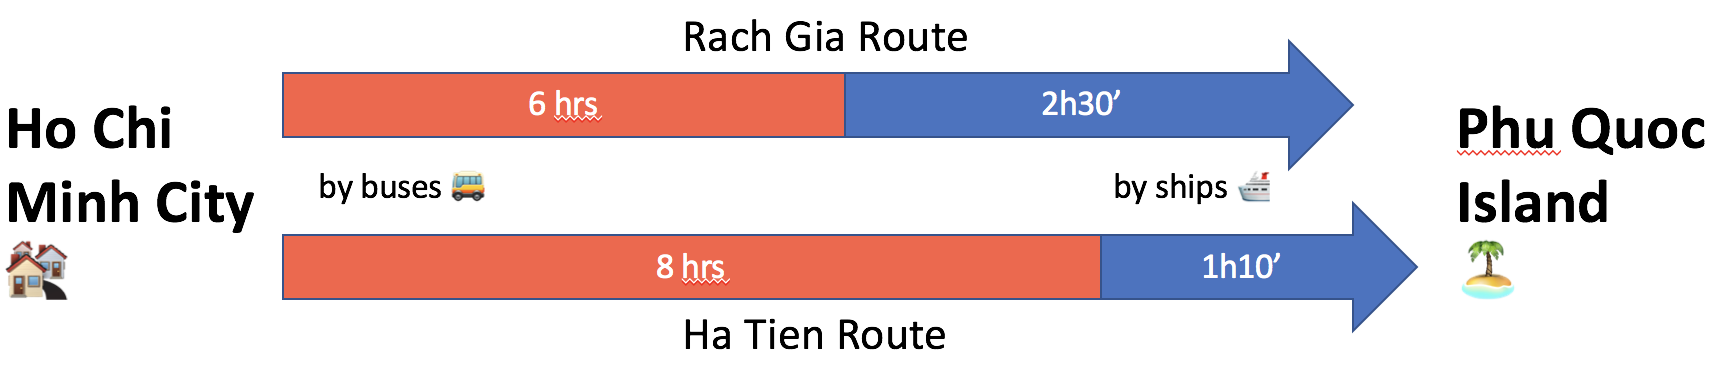 Different routes by buses and ships from Ho Chi CIty to Phu Quoc Island